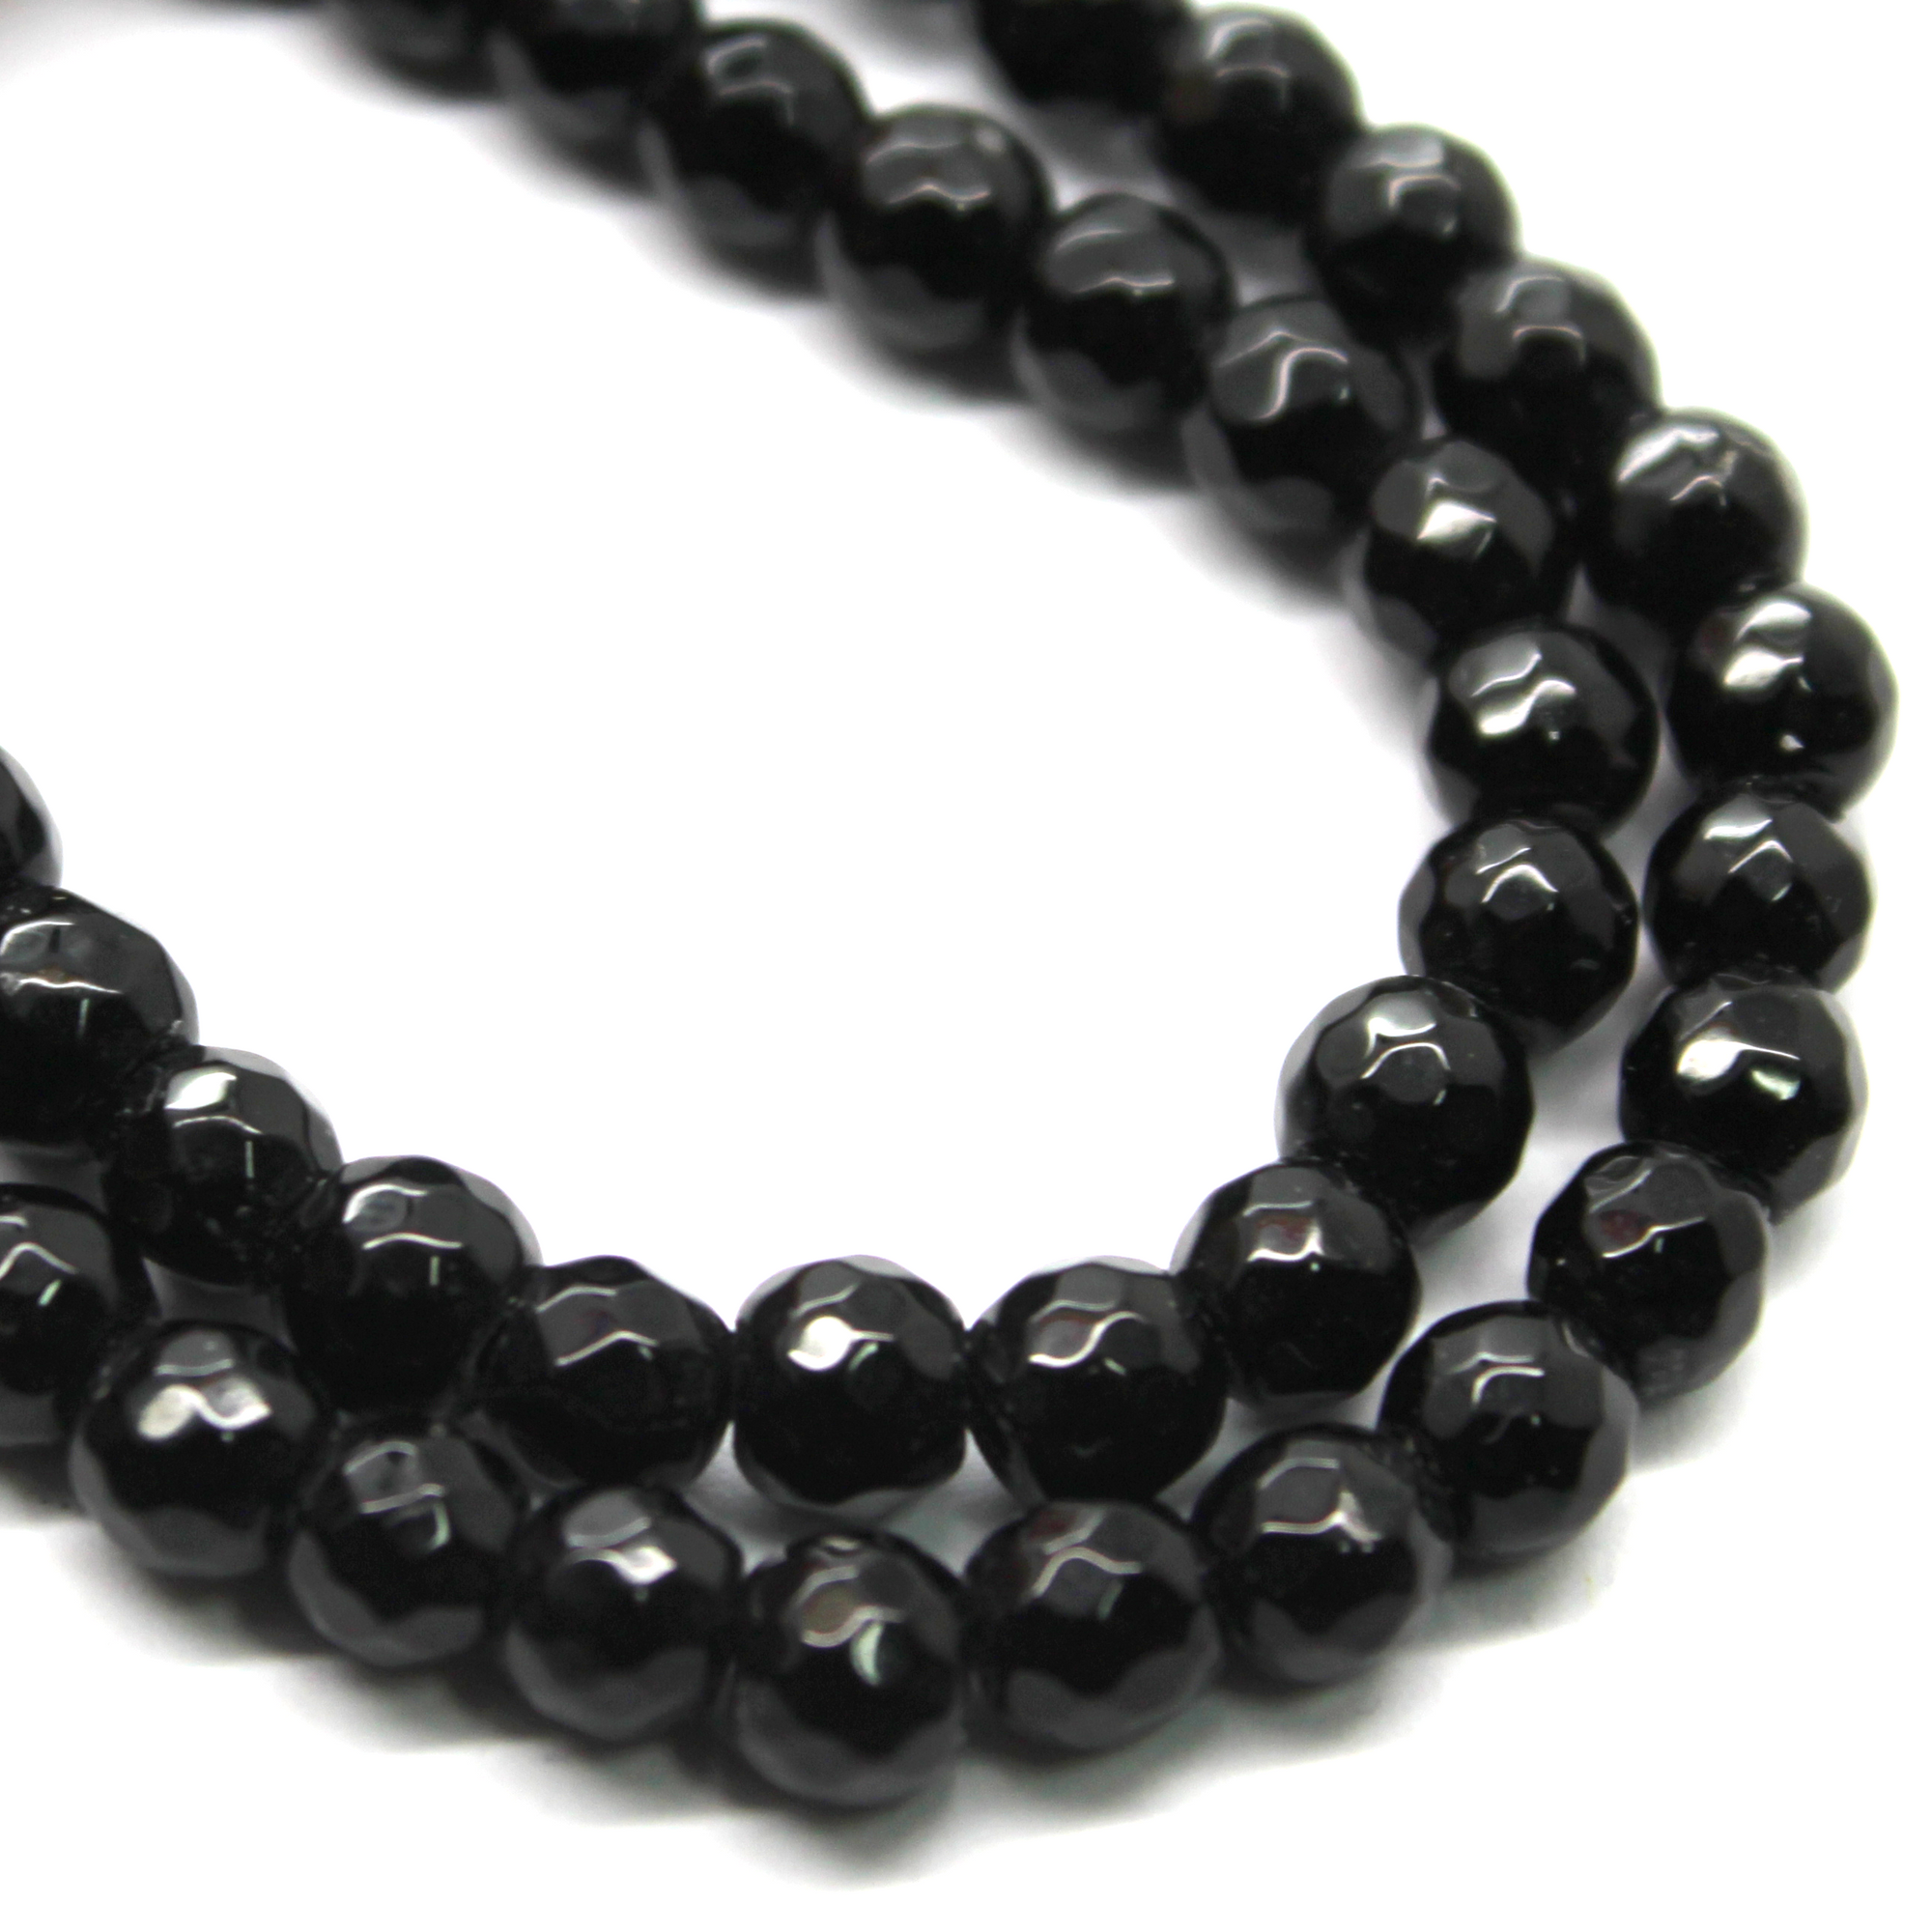 Onyx Faceted (A), Semi-Precious Stone, Available in Multiple Sizes